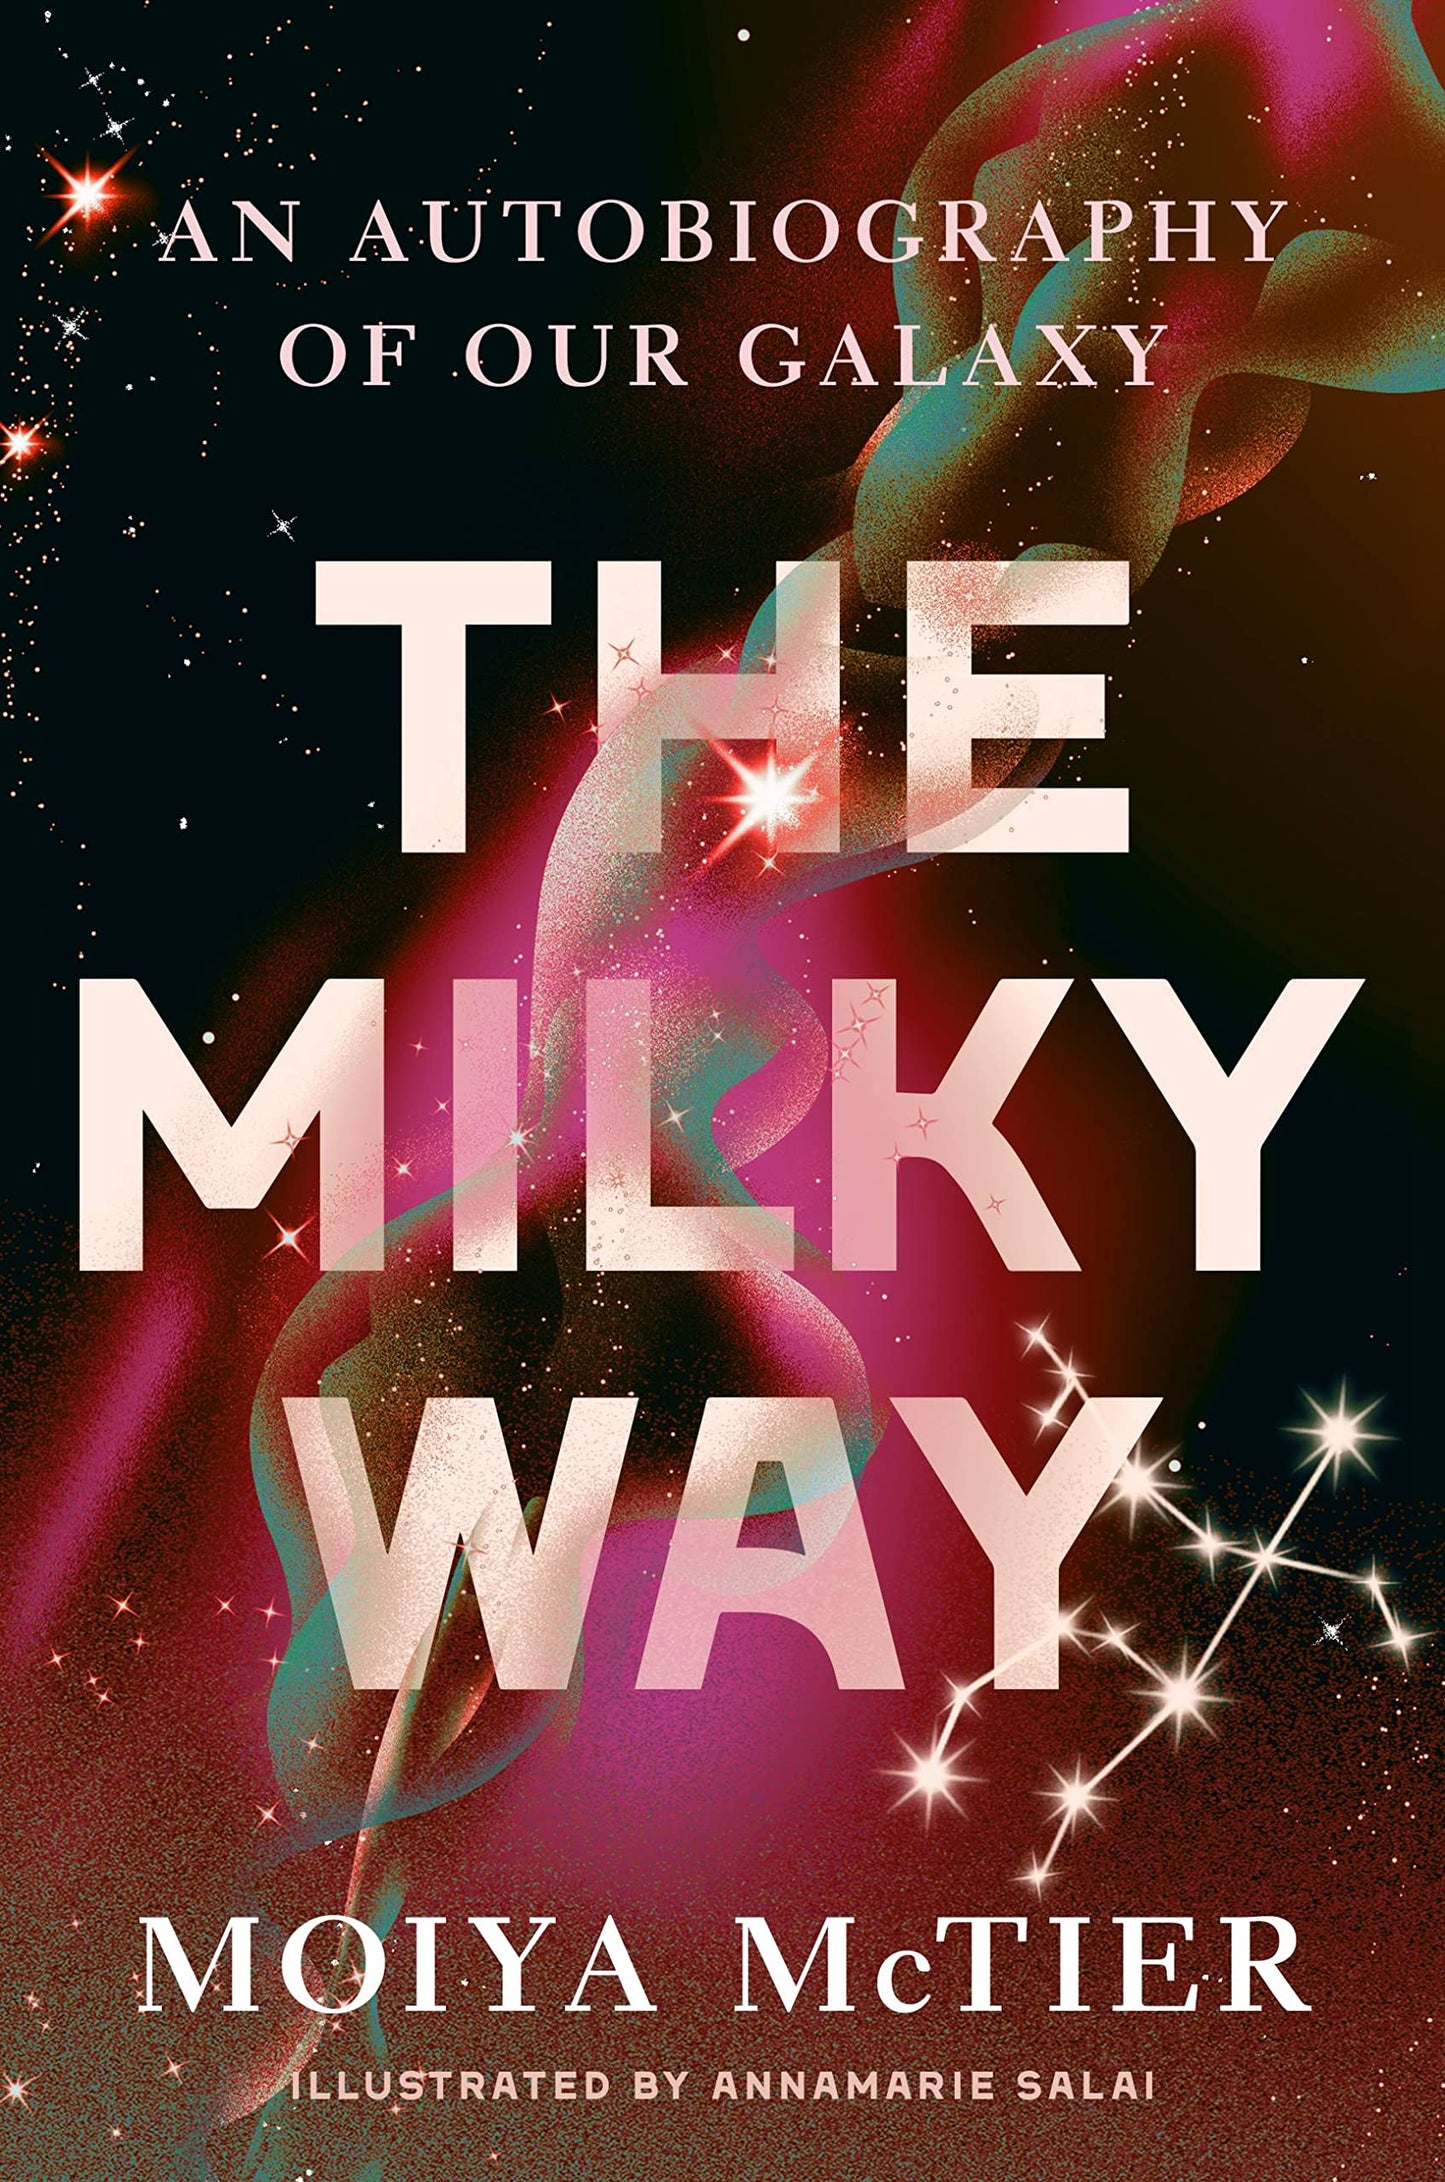 The Milky Way // An Autobiography of Our Galaxy